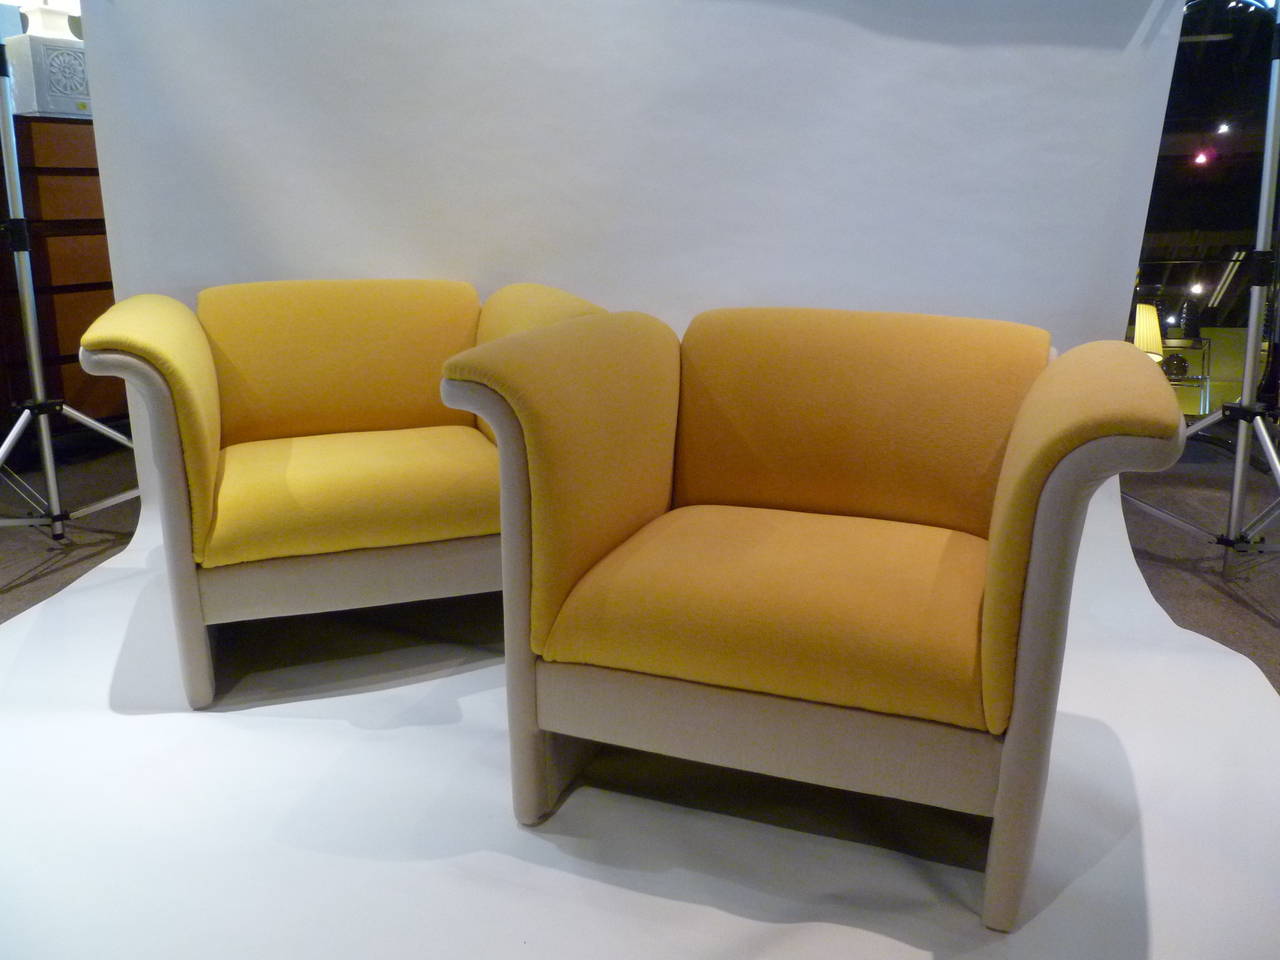 SOLD  With flared arms and back, these grand scale armchairs reflect the style of Dieter Rams 1960s designs. Freshly reupholstered in two toned micro loop Knoll fabric.

Measurements:
40 1/2